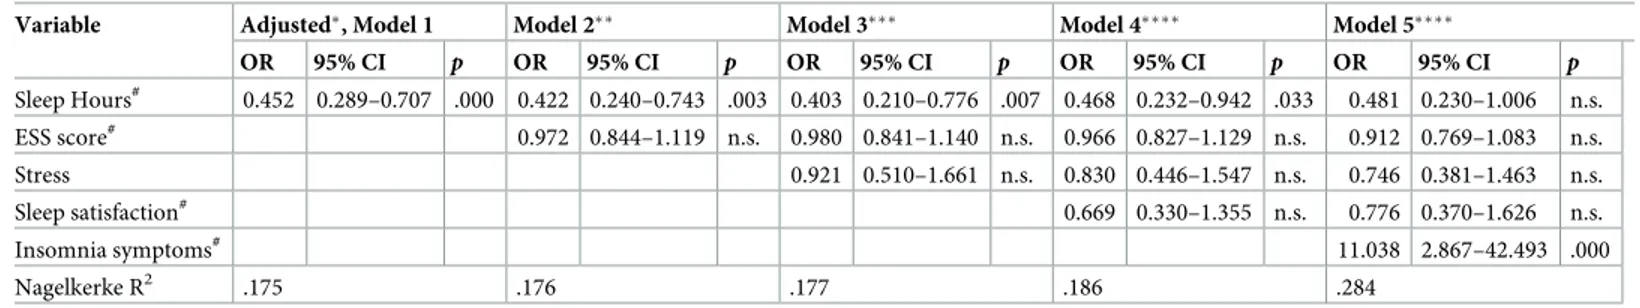 Table 3. Association of sleep problems with incident cases of metabolic syndrome. Hierarchical regression analysis.